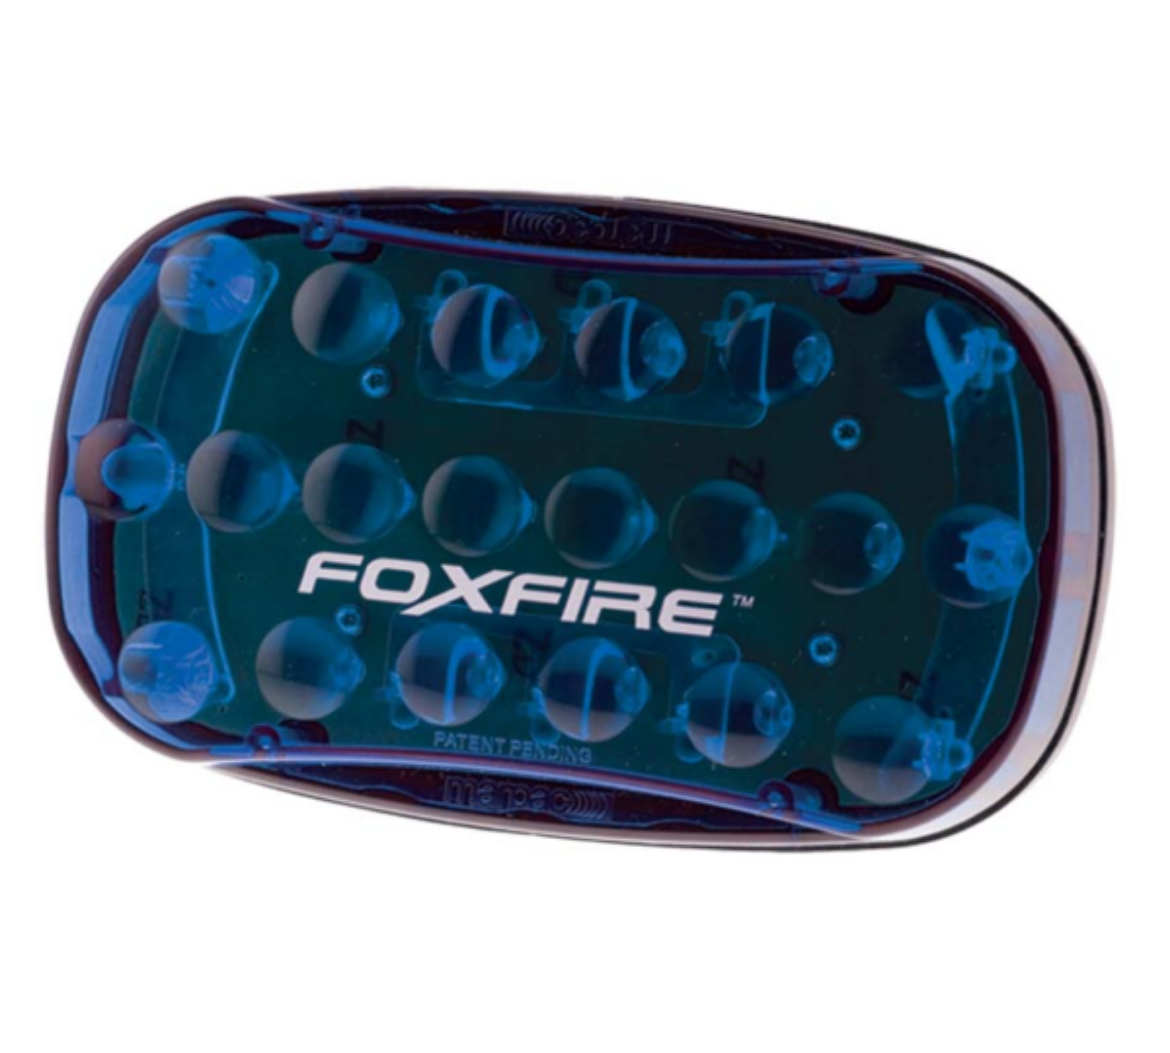 Picture of BLUE FOXFIRE MAGNETIC BACK W/26 LEDS & WIG-WAG PATTERN